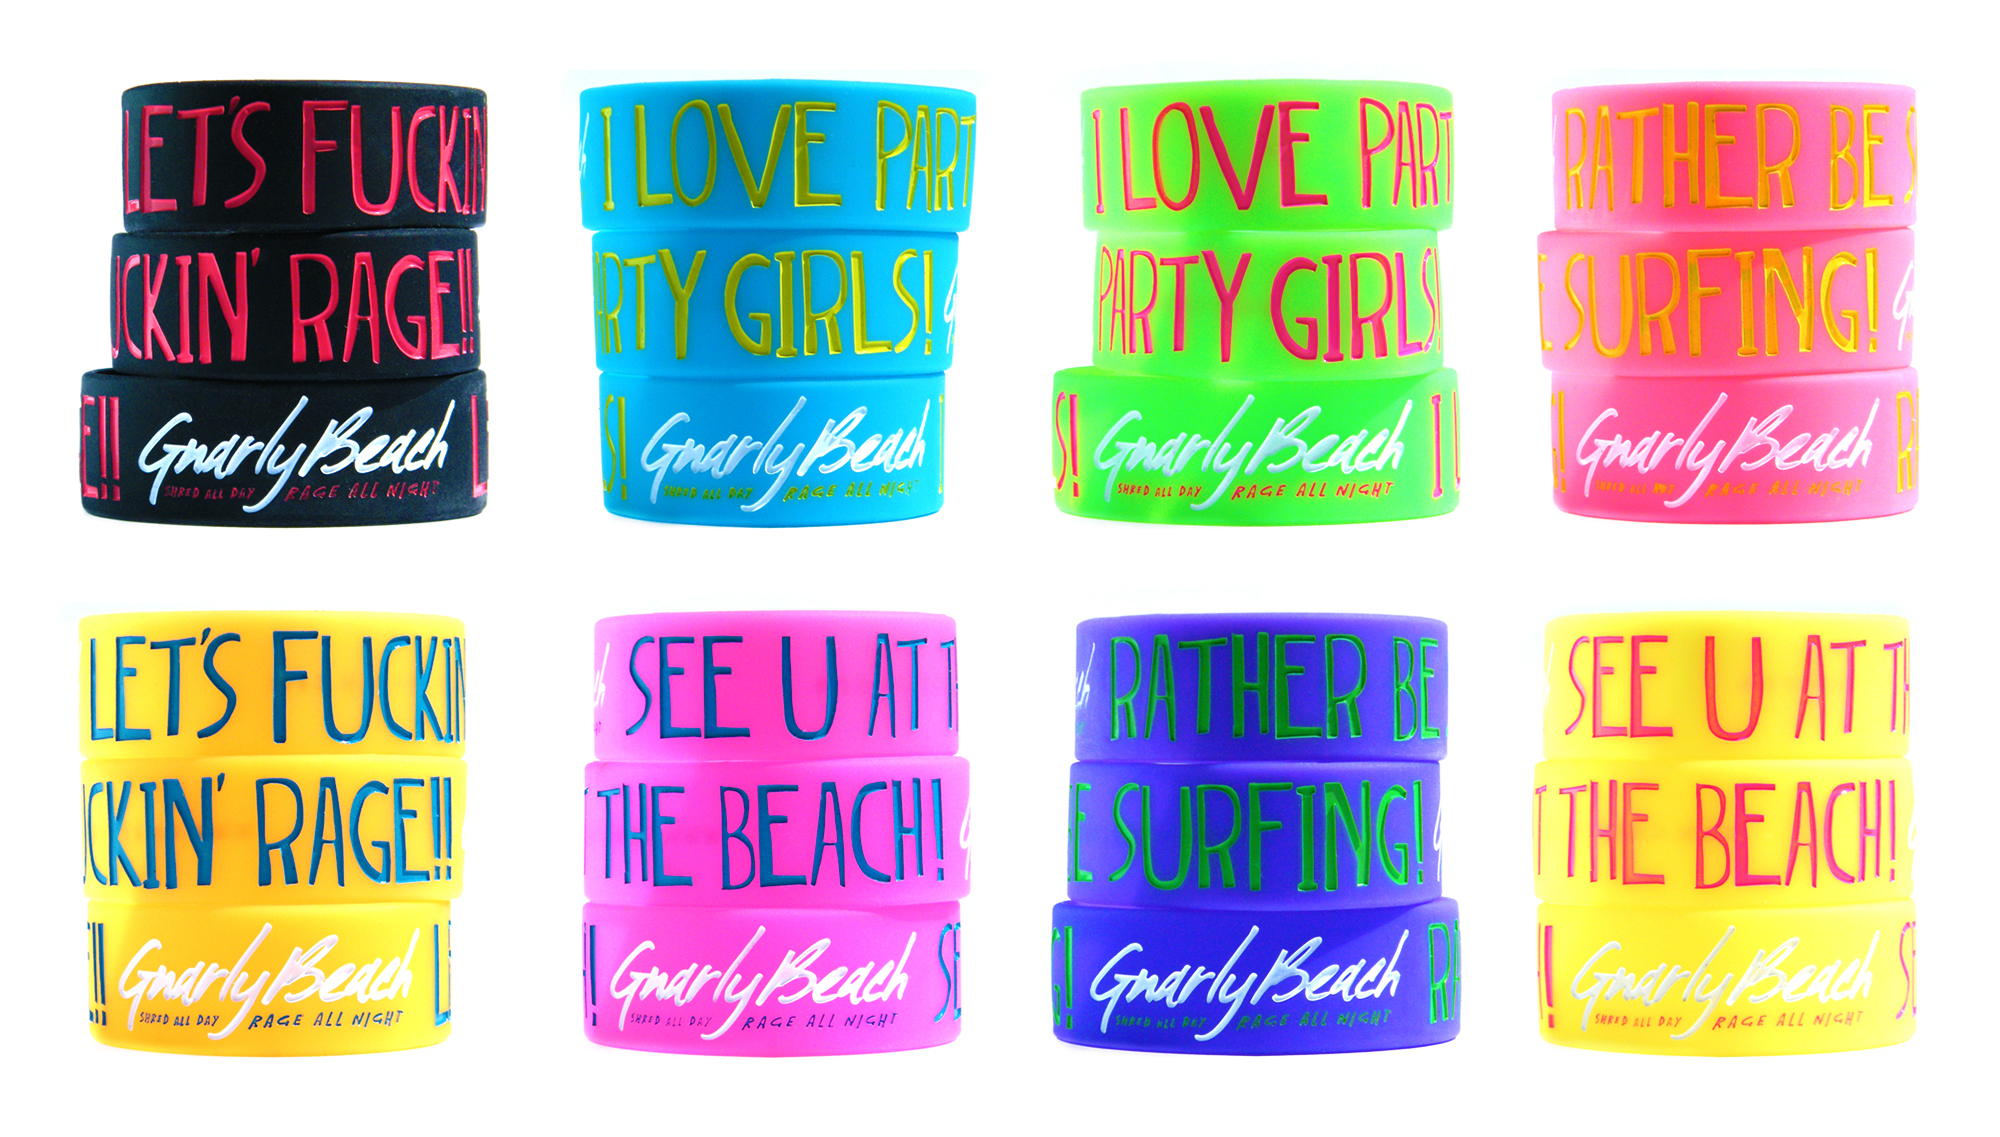 gnarly beach, lifestyle brands, fanny pack, neon, beach wear, festival clothing, party pack, beach wear, california clothing, beach hat, beach cap, vball cap, volleyball hat, silicone bracelet, silicone wristband, wristbands, rubber wristbands,